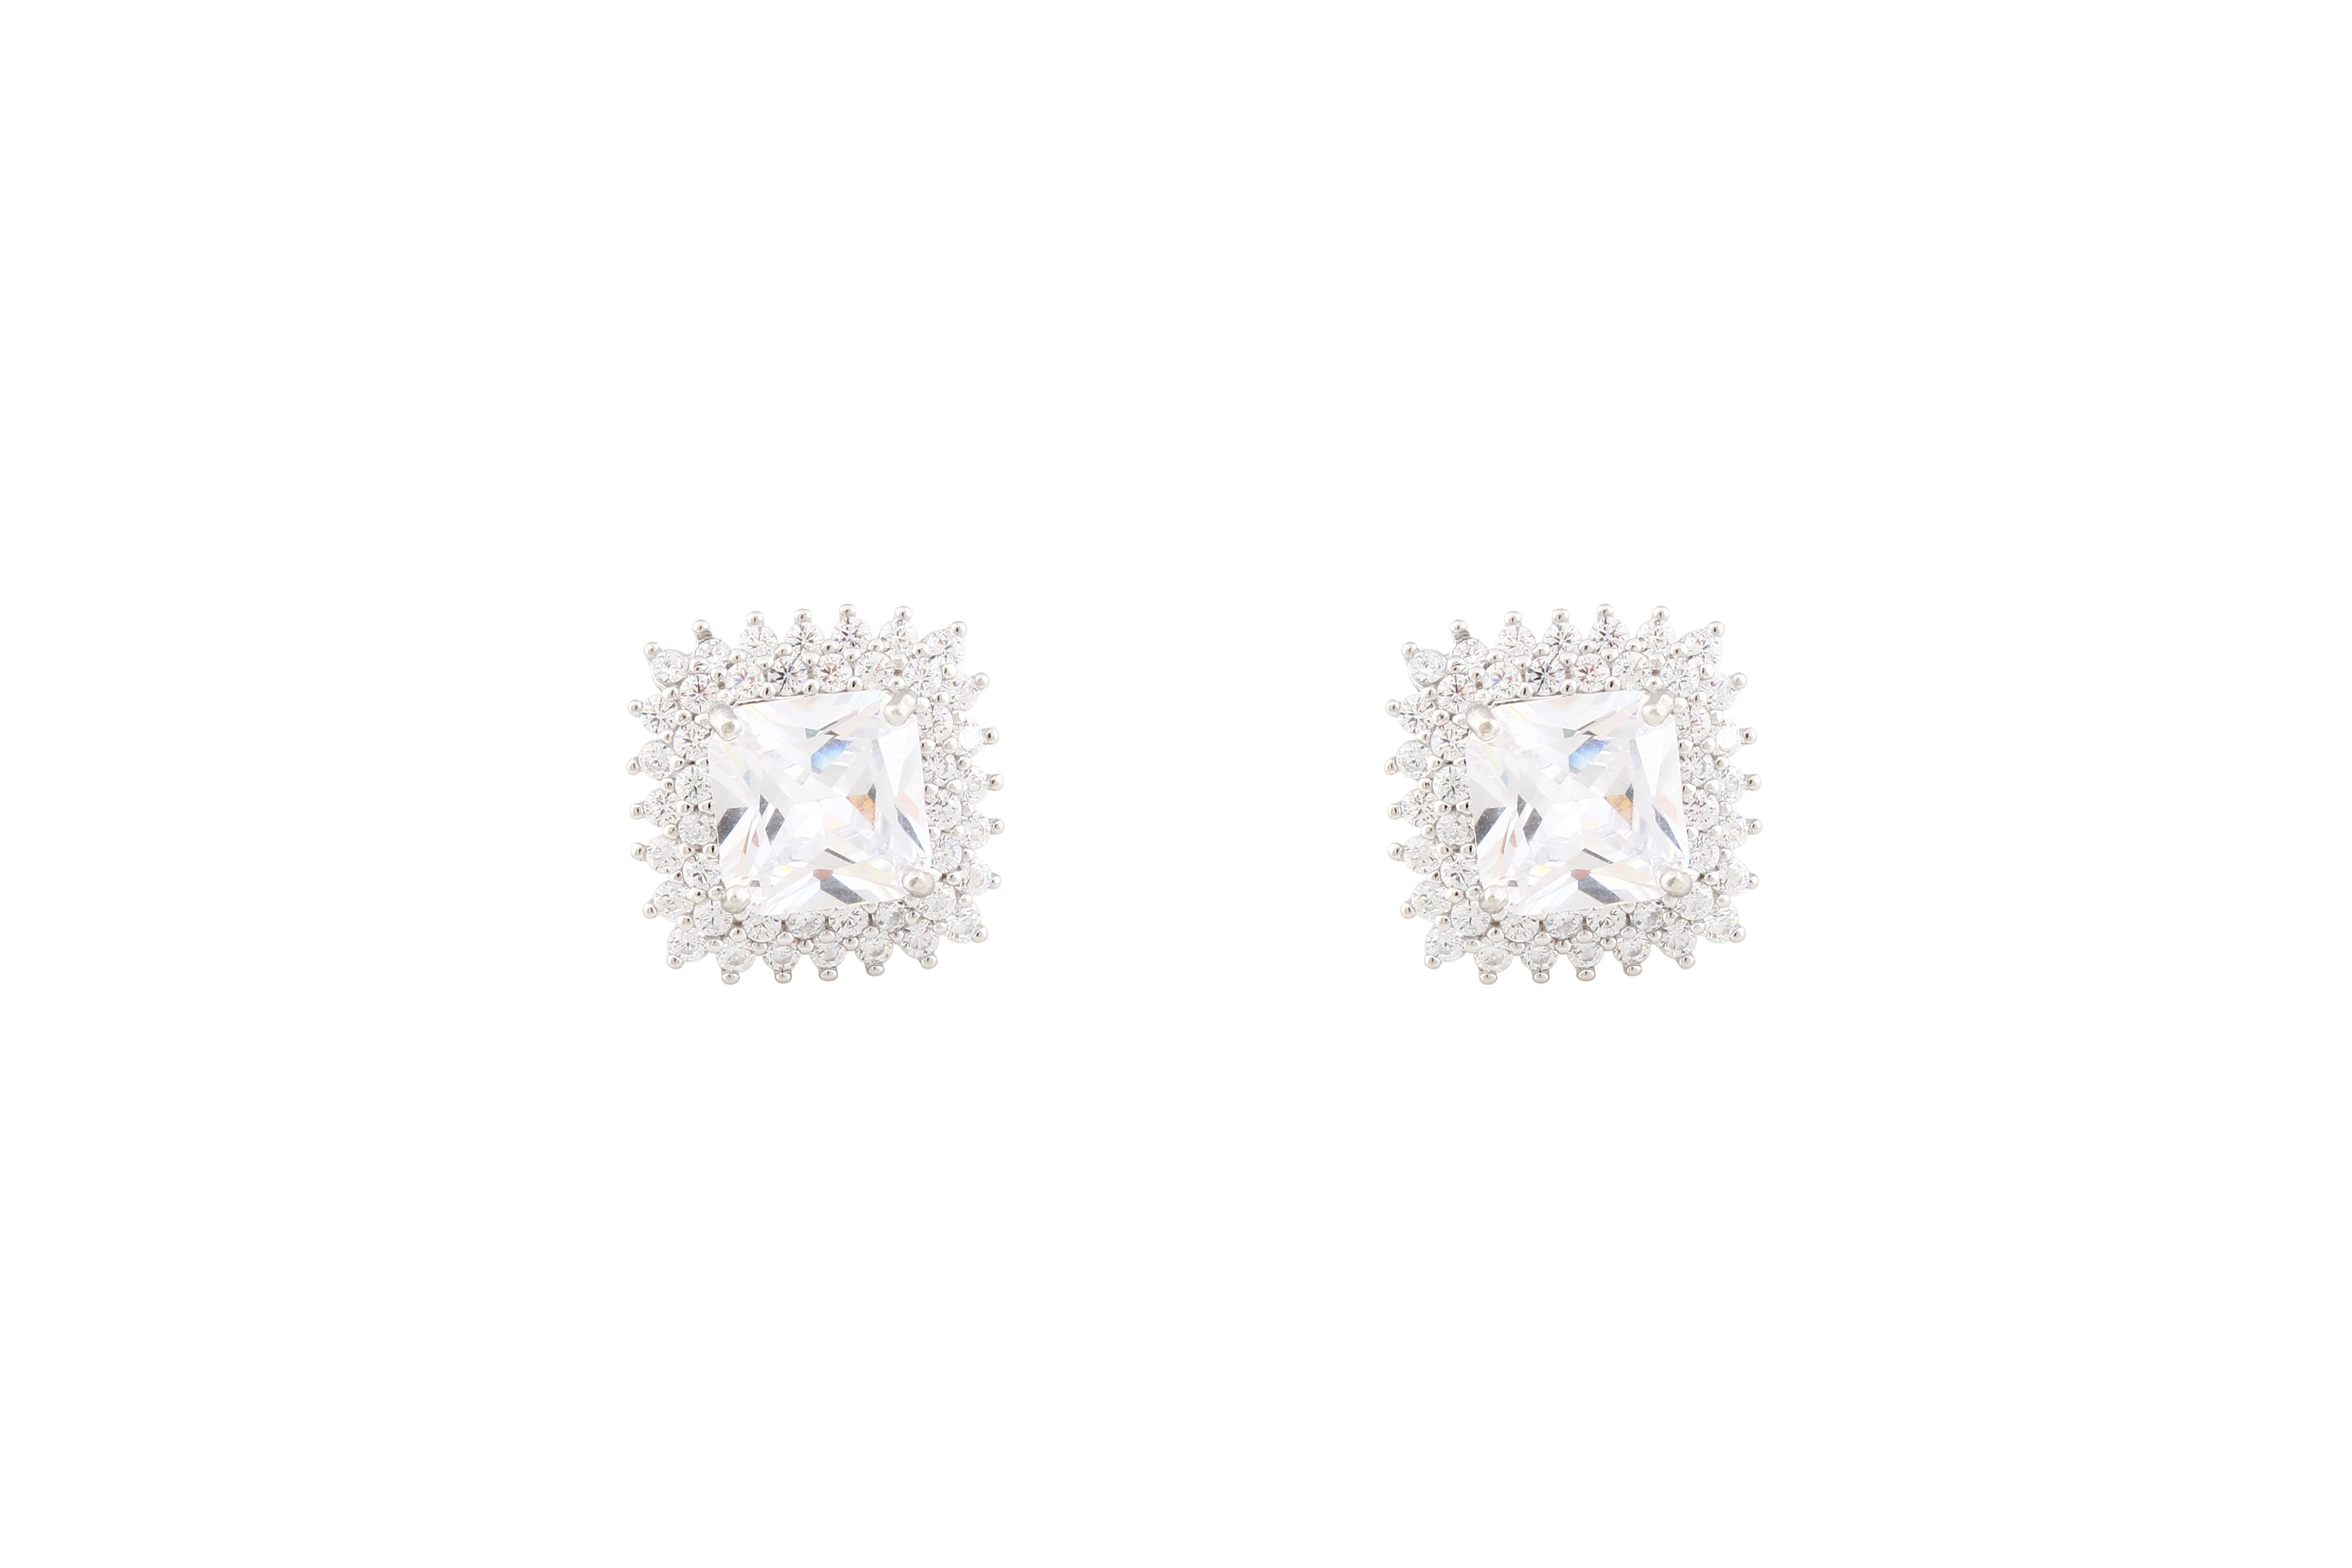 Asfour Crystal Halo Stud Earrings With Cushion Cut Zircon Stone In 925 Sterling Silver ER0427-W